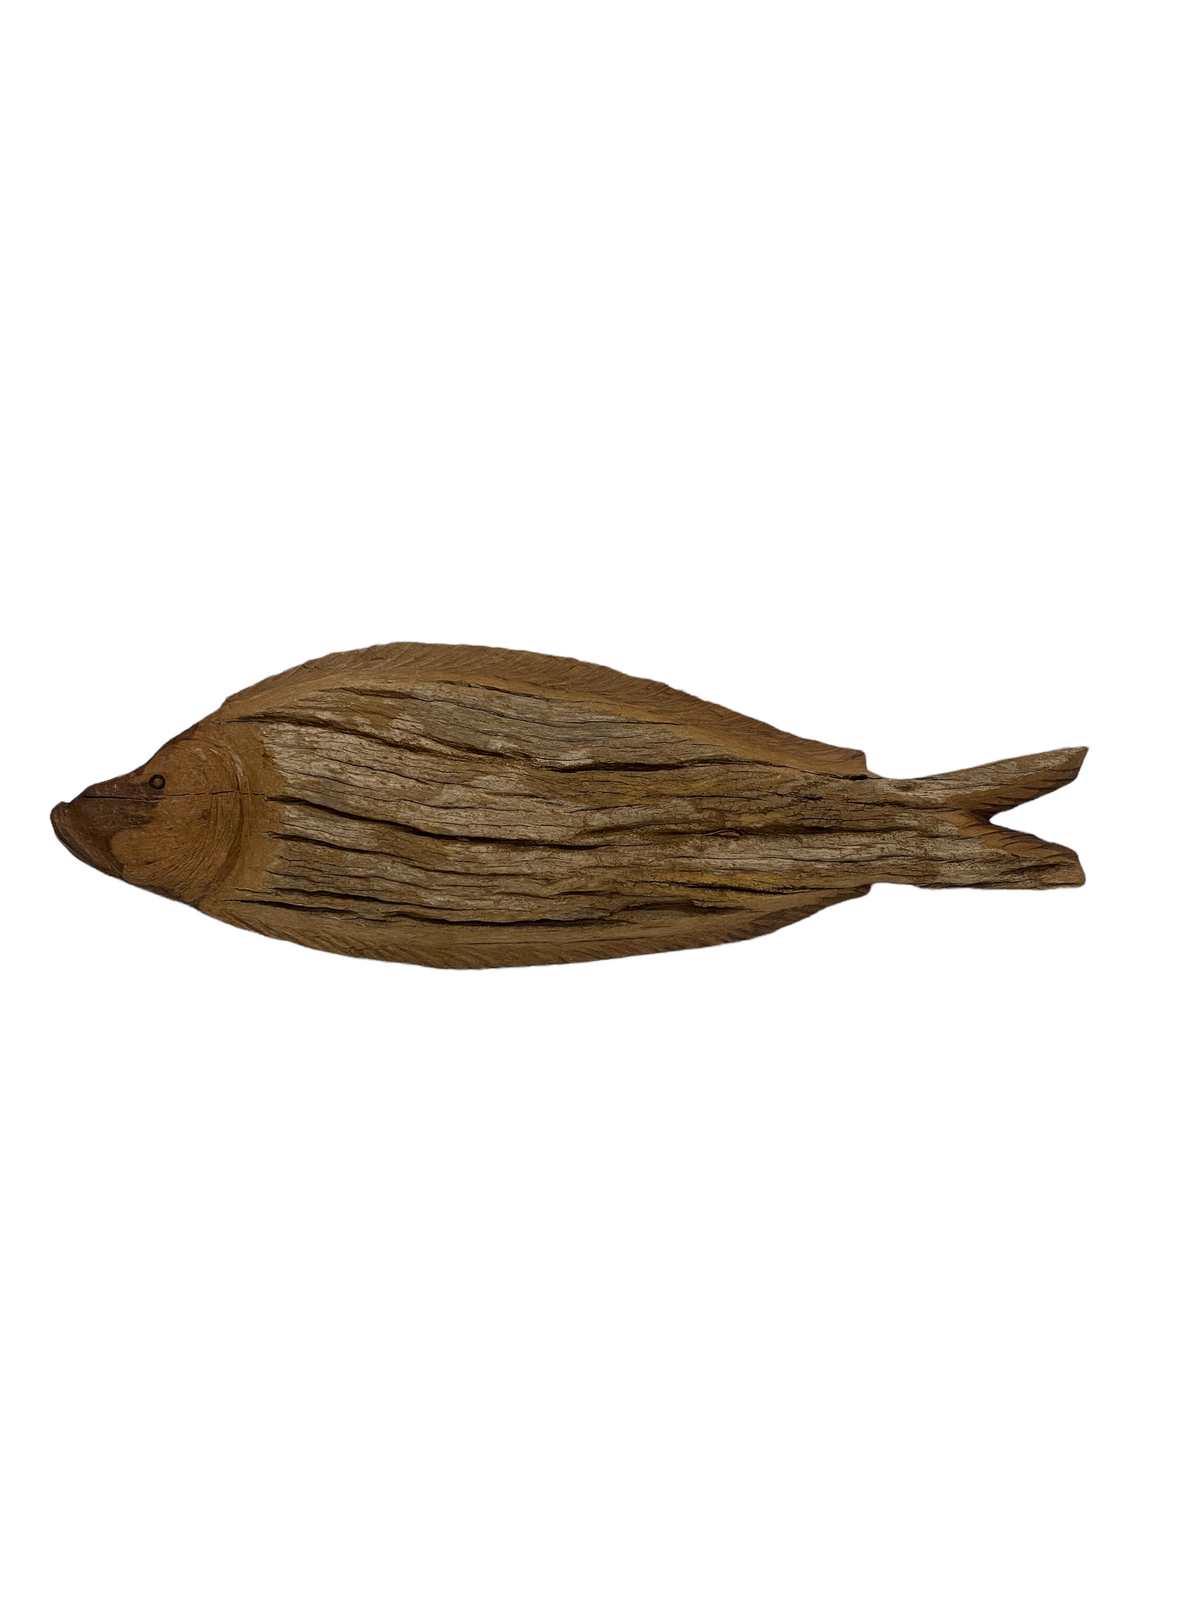 Driftwood Hand Carved Fish - (13.1) Large